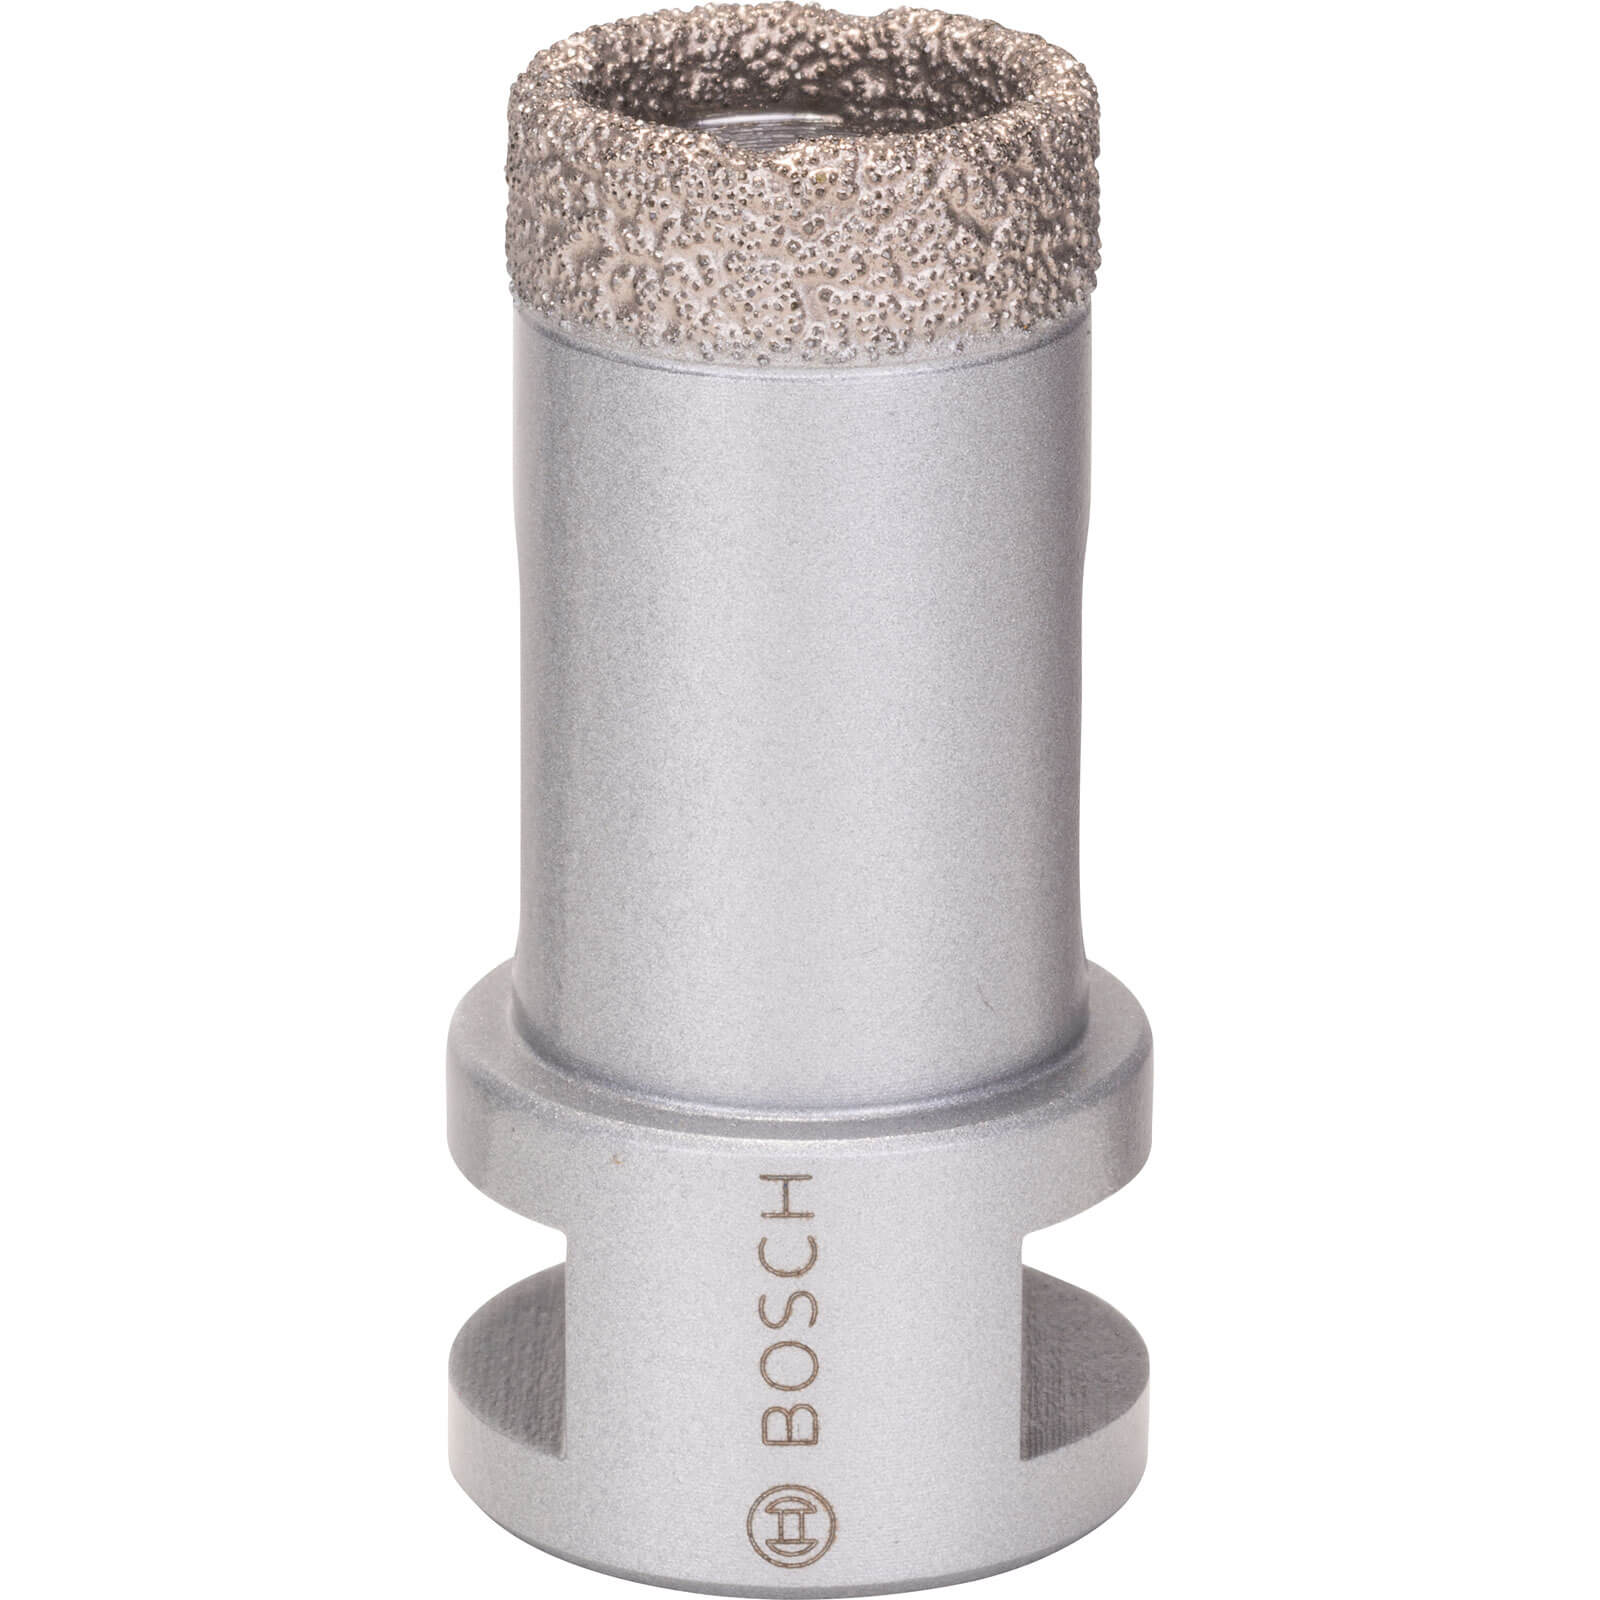 Image of Bosch Angle Grinder Dry Diamond Hole Cutter For Ceramics 25mm